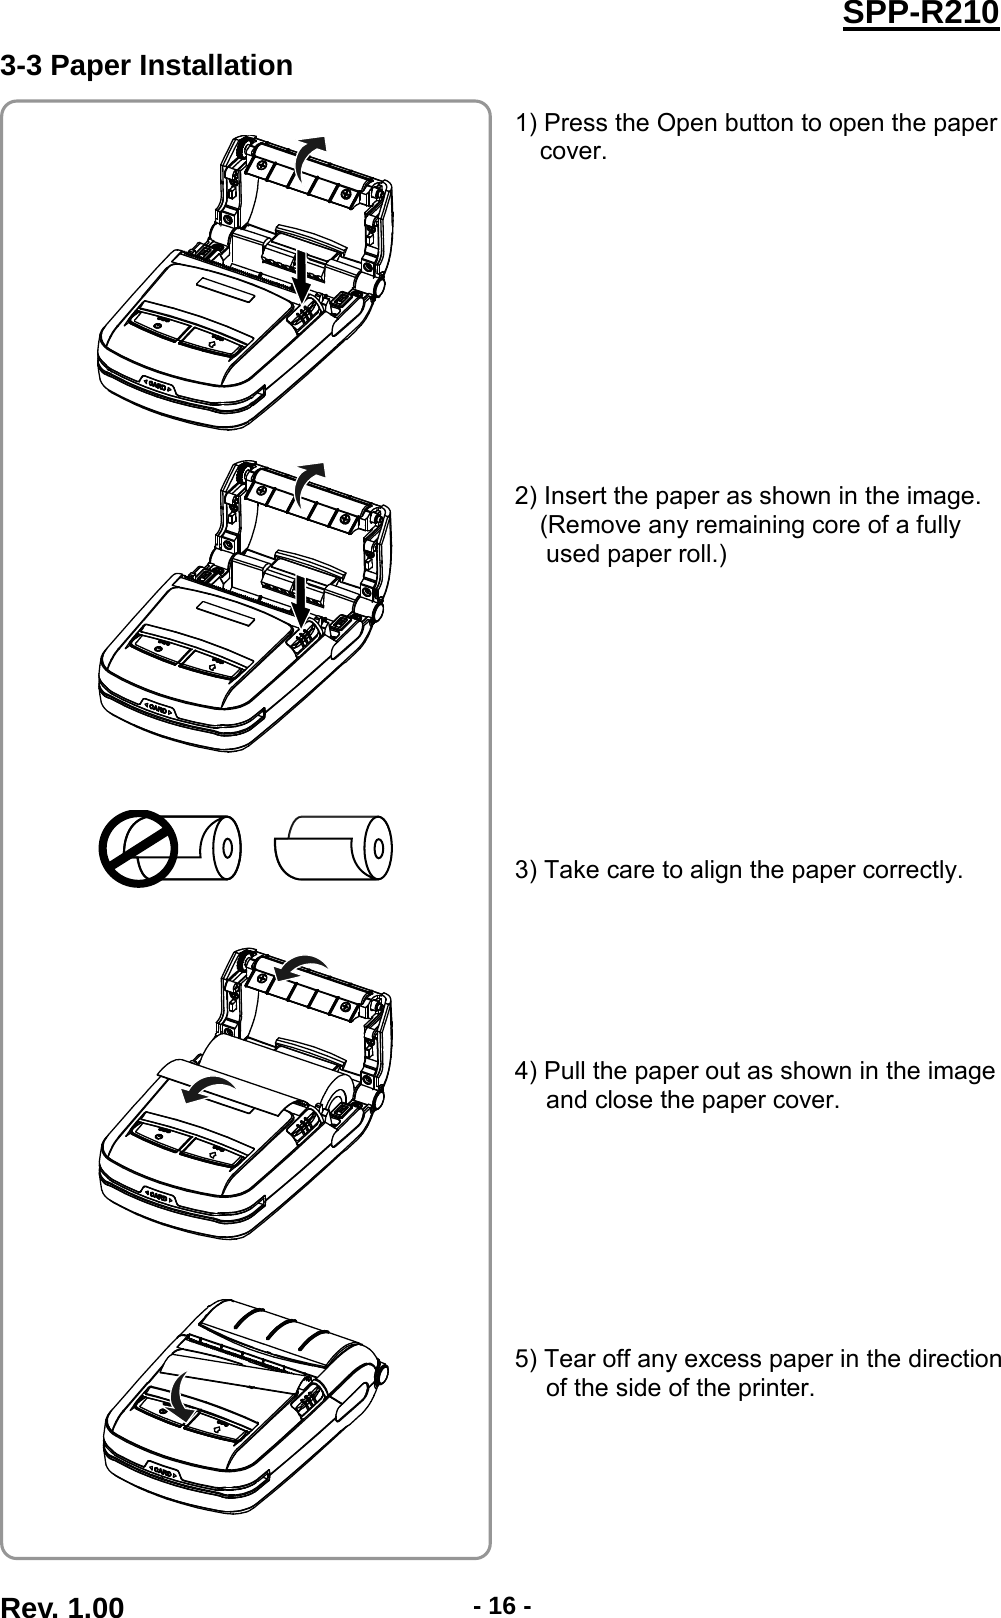  SPP-R210 3-3 Paper Installation   1) Press the Open button to open the paper cover.            2) Insert the paper as shown in the image. (Remove any remaining core of a fully used paper roll.)           3) Take care to align the paper correctly.       4) Pull the paper out as shown in the image and close the paper cover.         5) Tear off any excess paper in the direction of the side of the printer.                   Rev. 1.00  - 16 - 